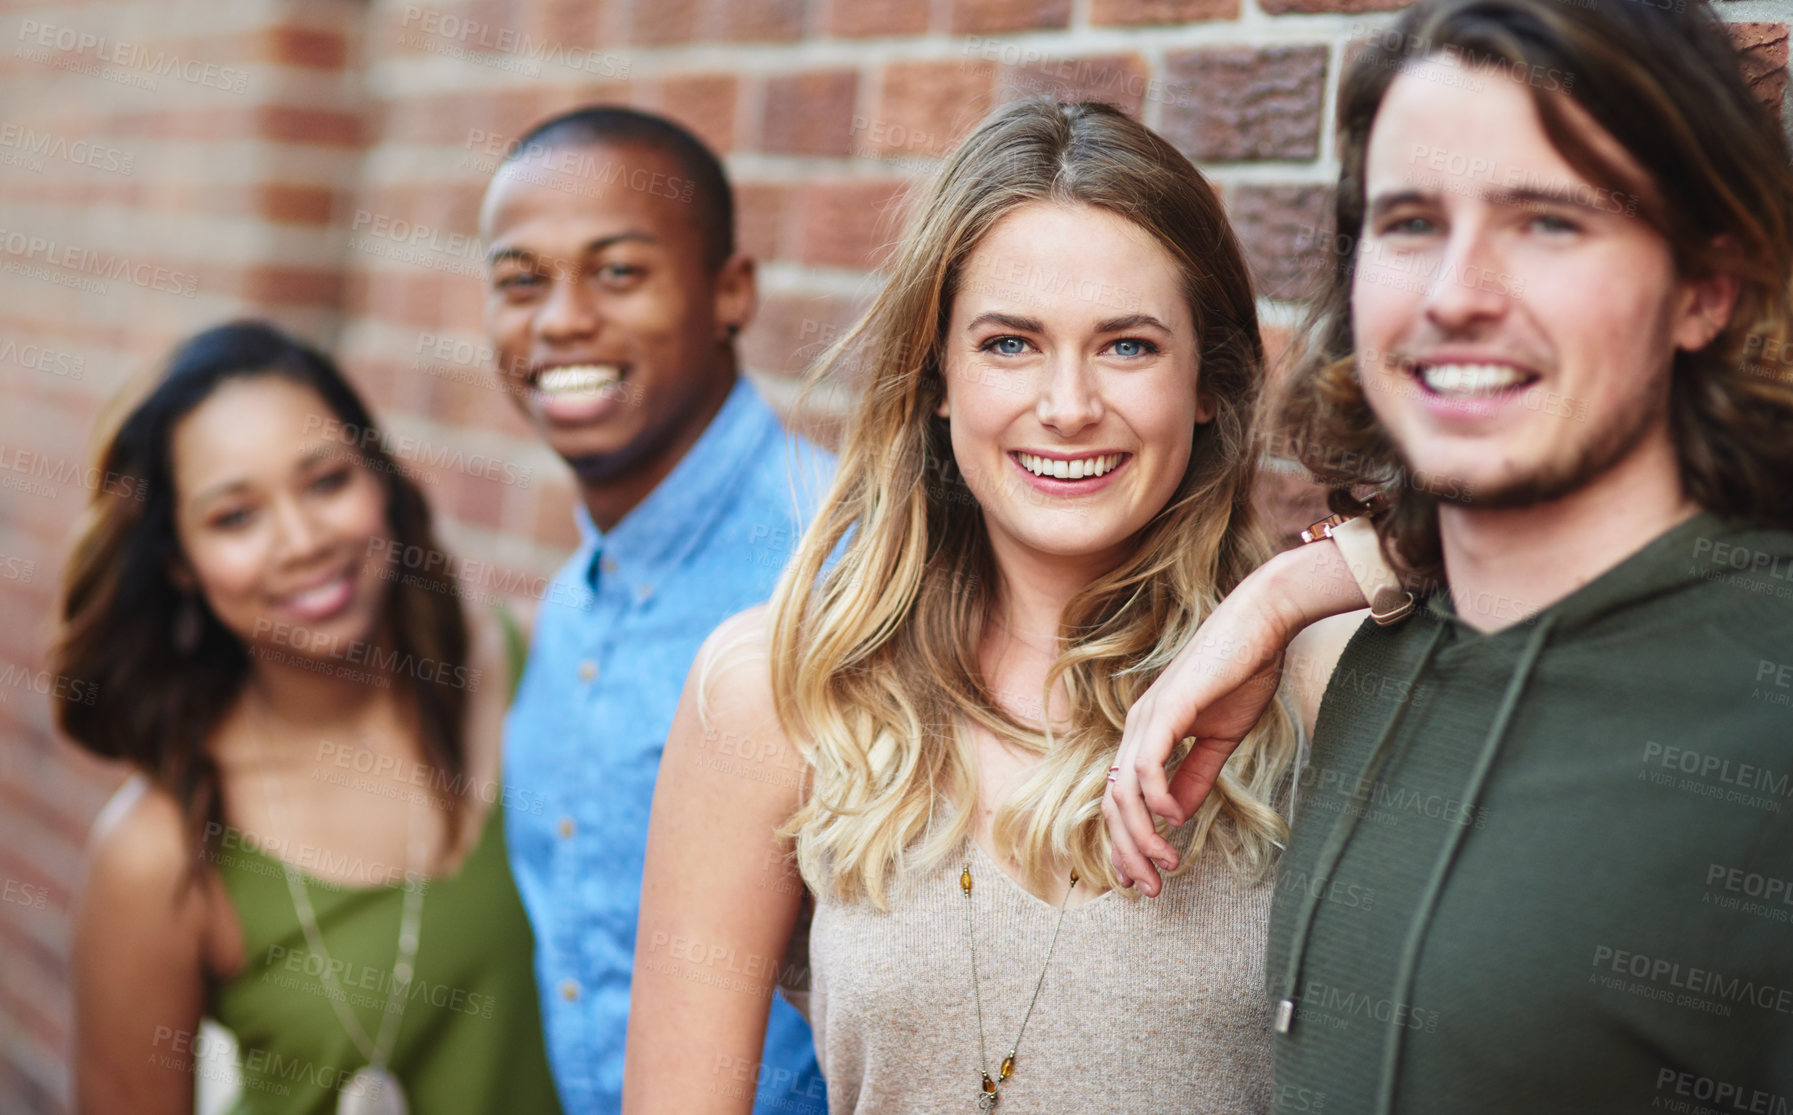 Buy stock photo Portrait of a group of friends hanging out together